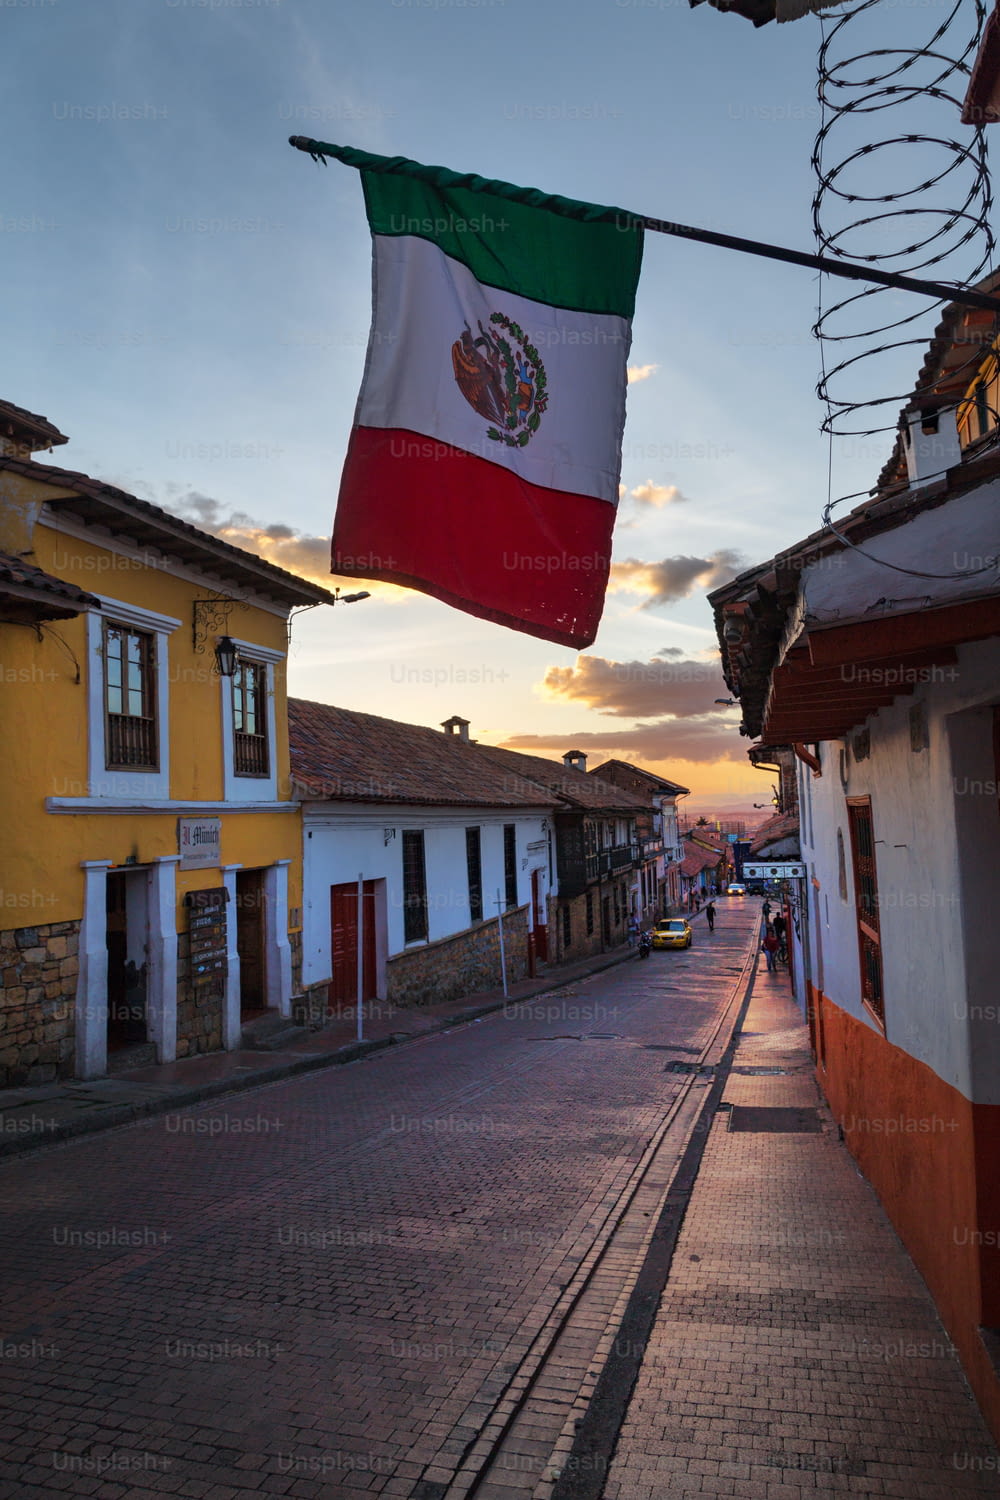 The Mexican flag over a cobblestone street in the Candelaria neighborhood of Bogota, Colombia